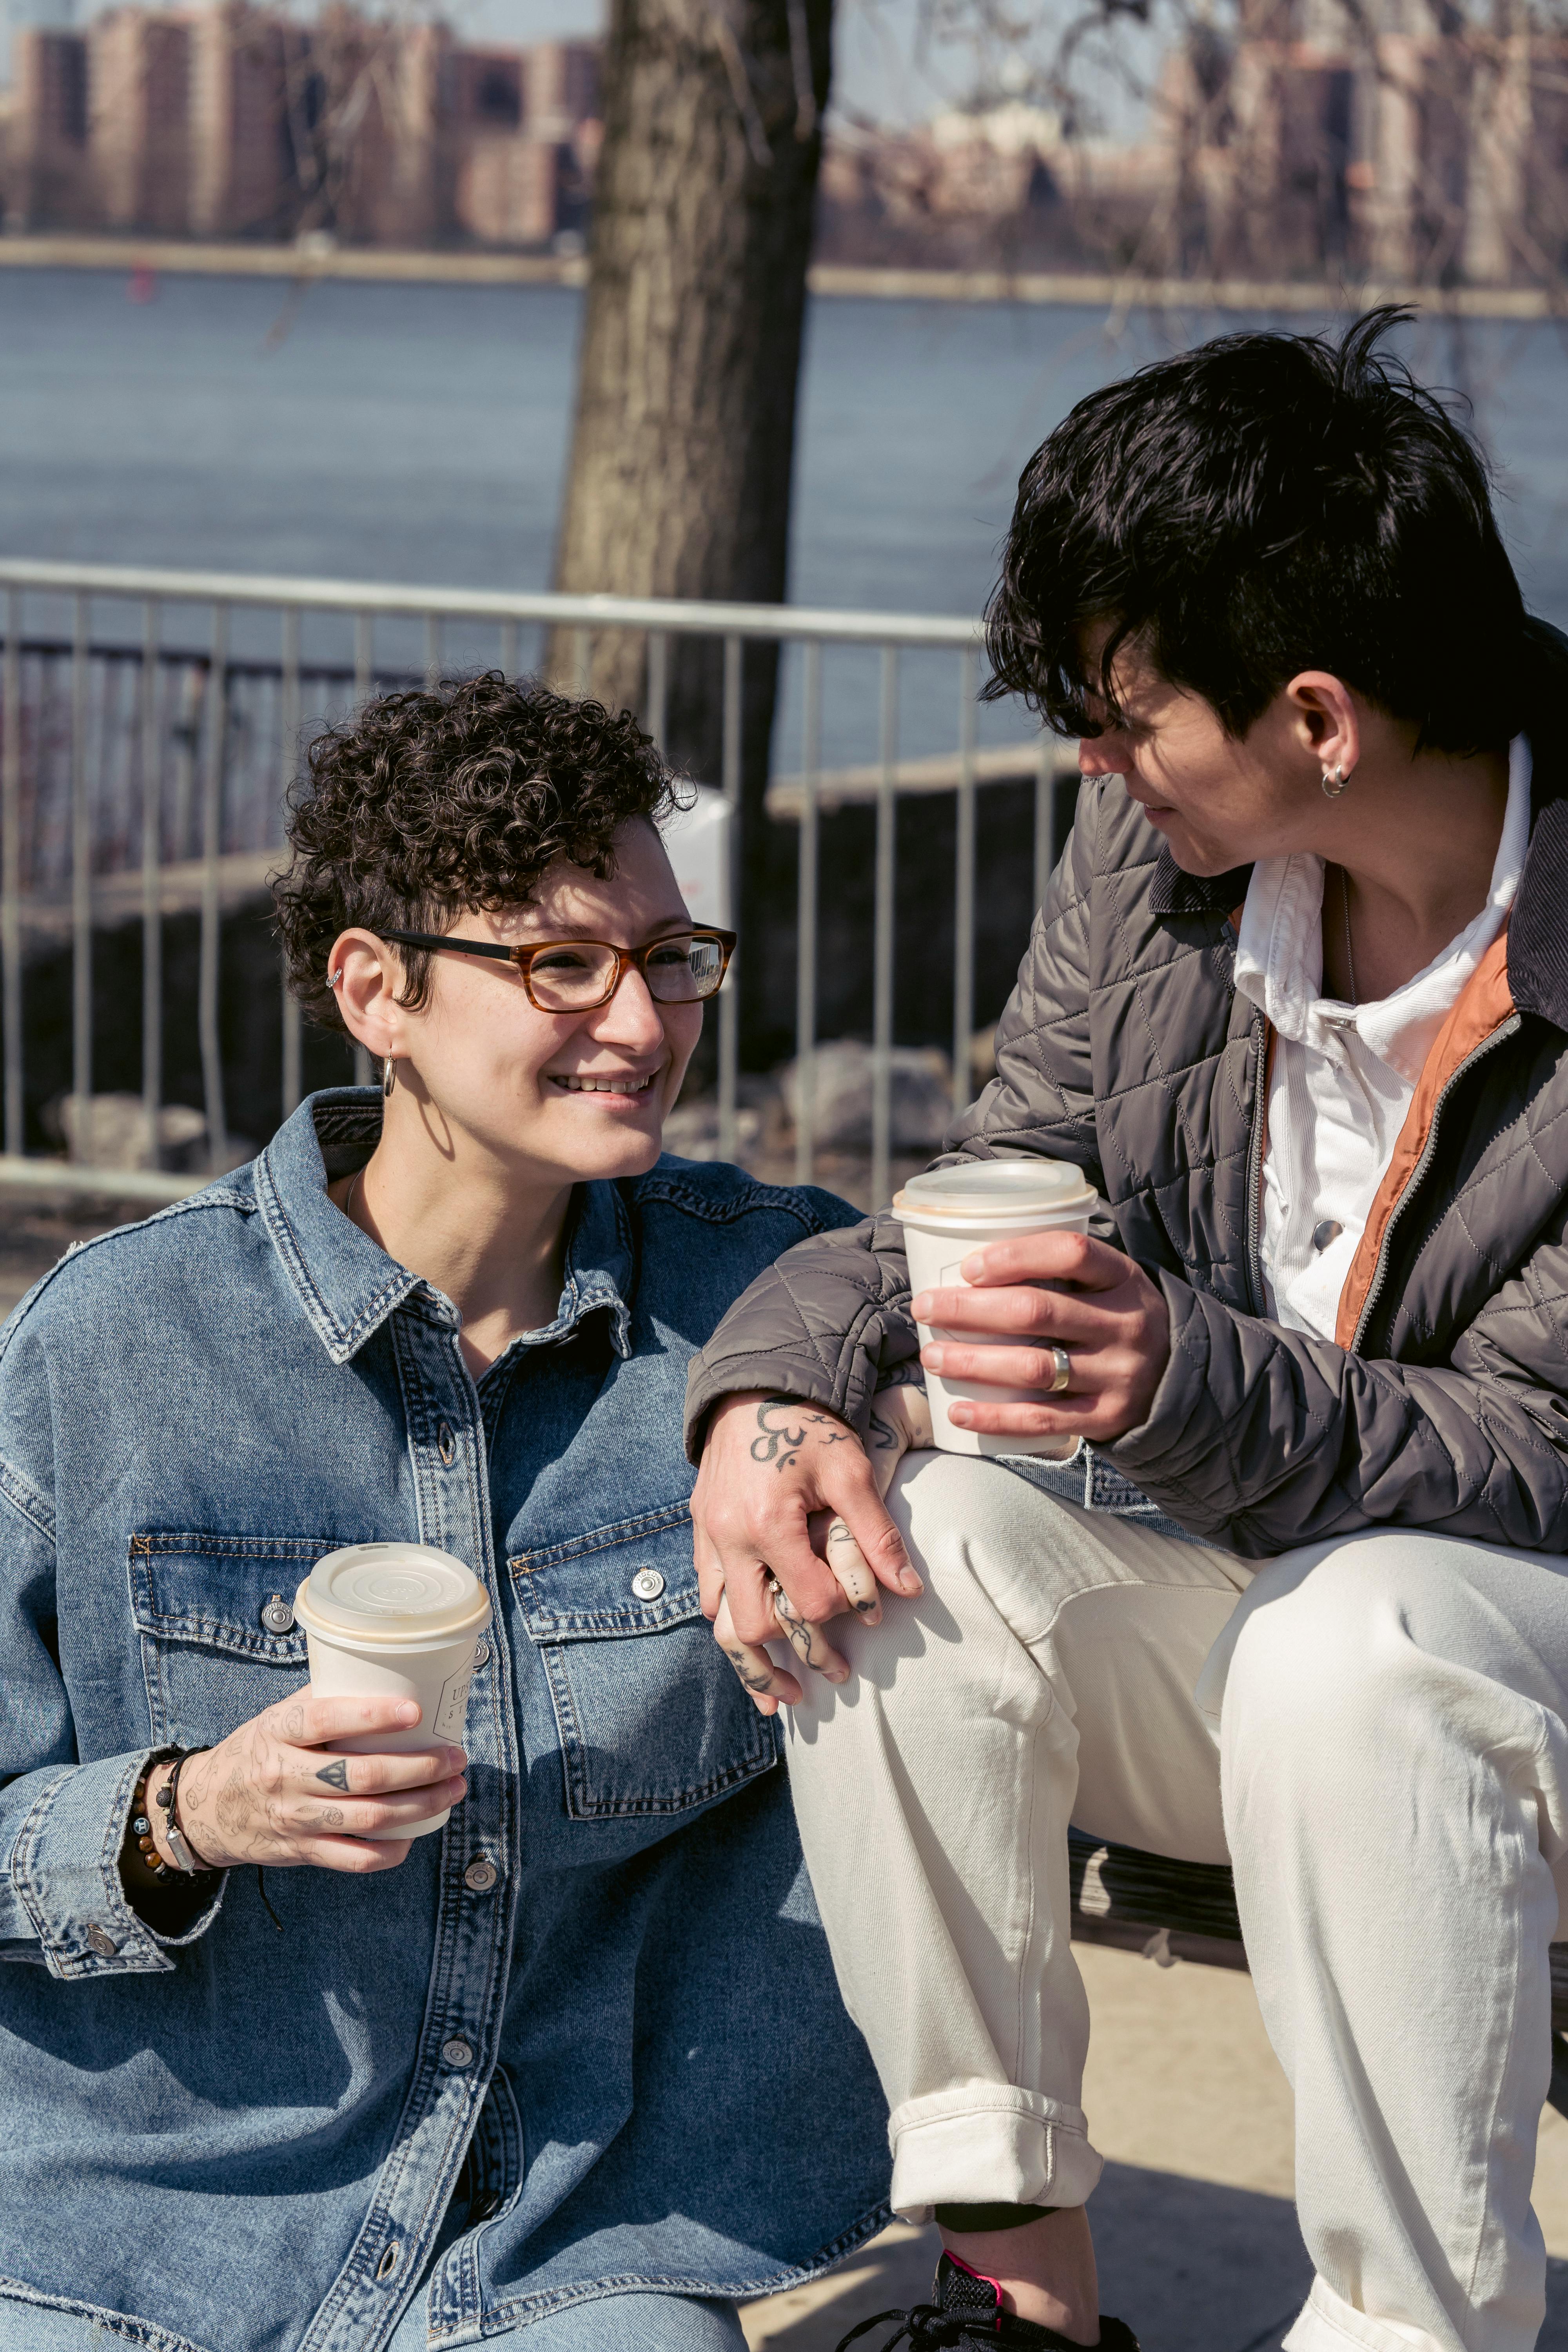 beloved lesbians holding hands and drinking coffee near river in city